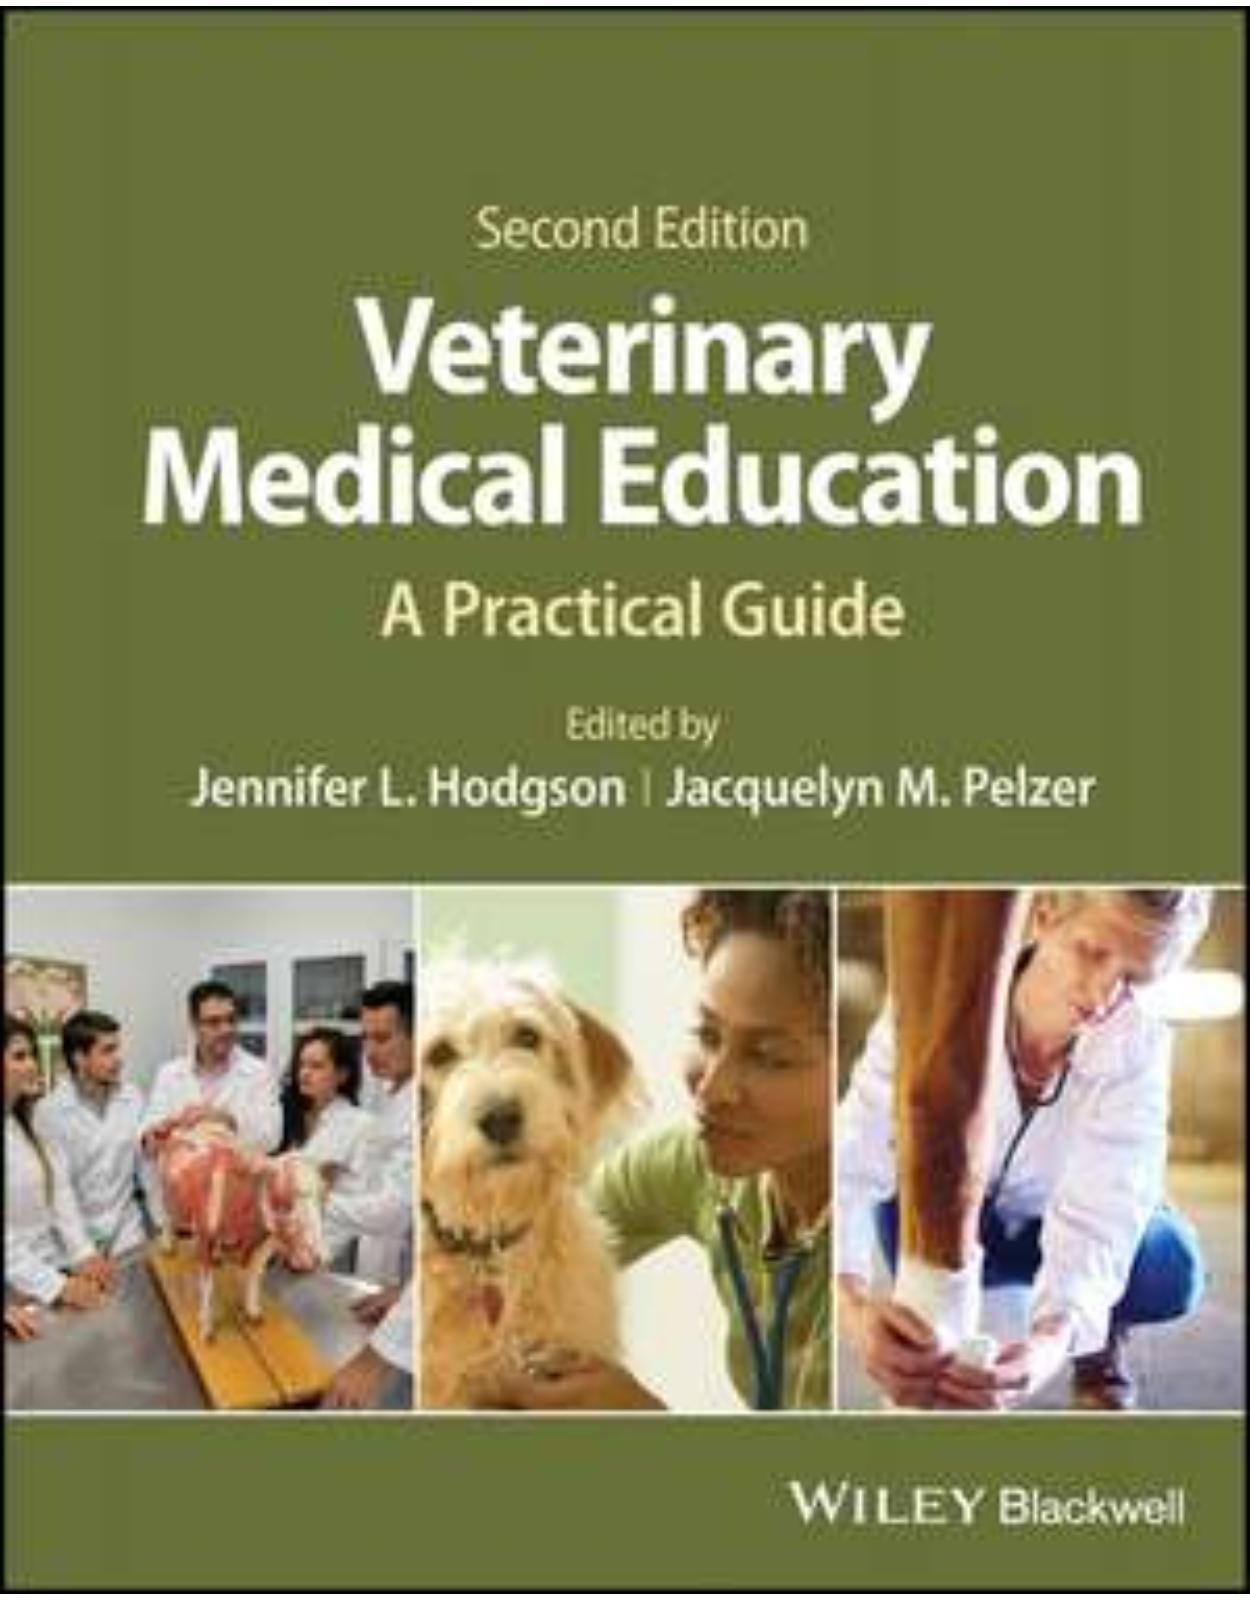 Veterinary Medical Education – A Practical Guide